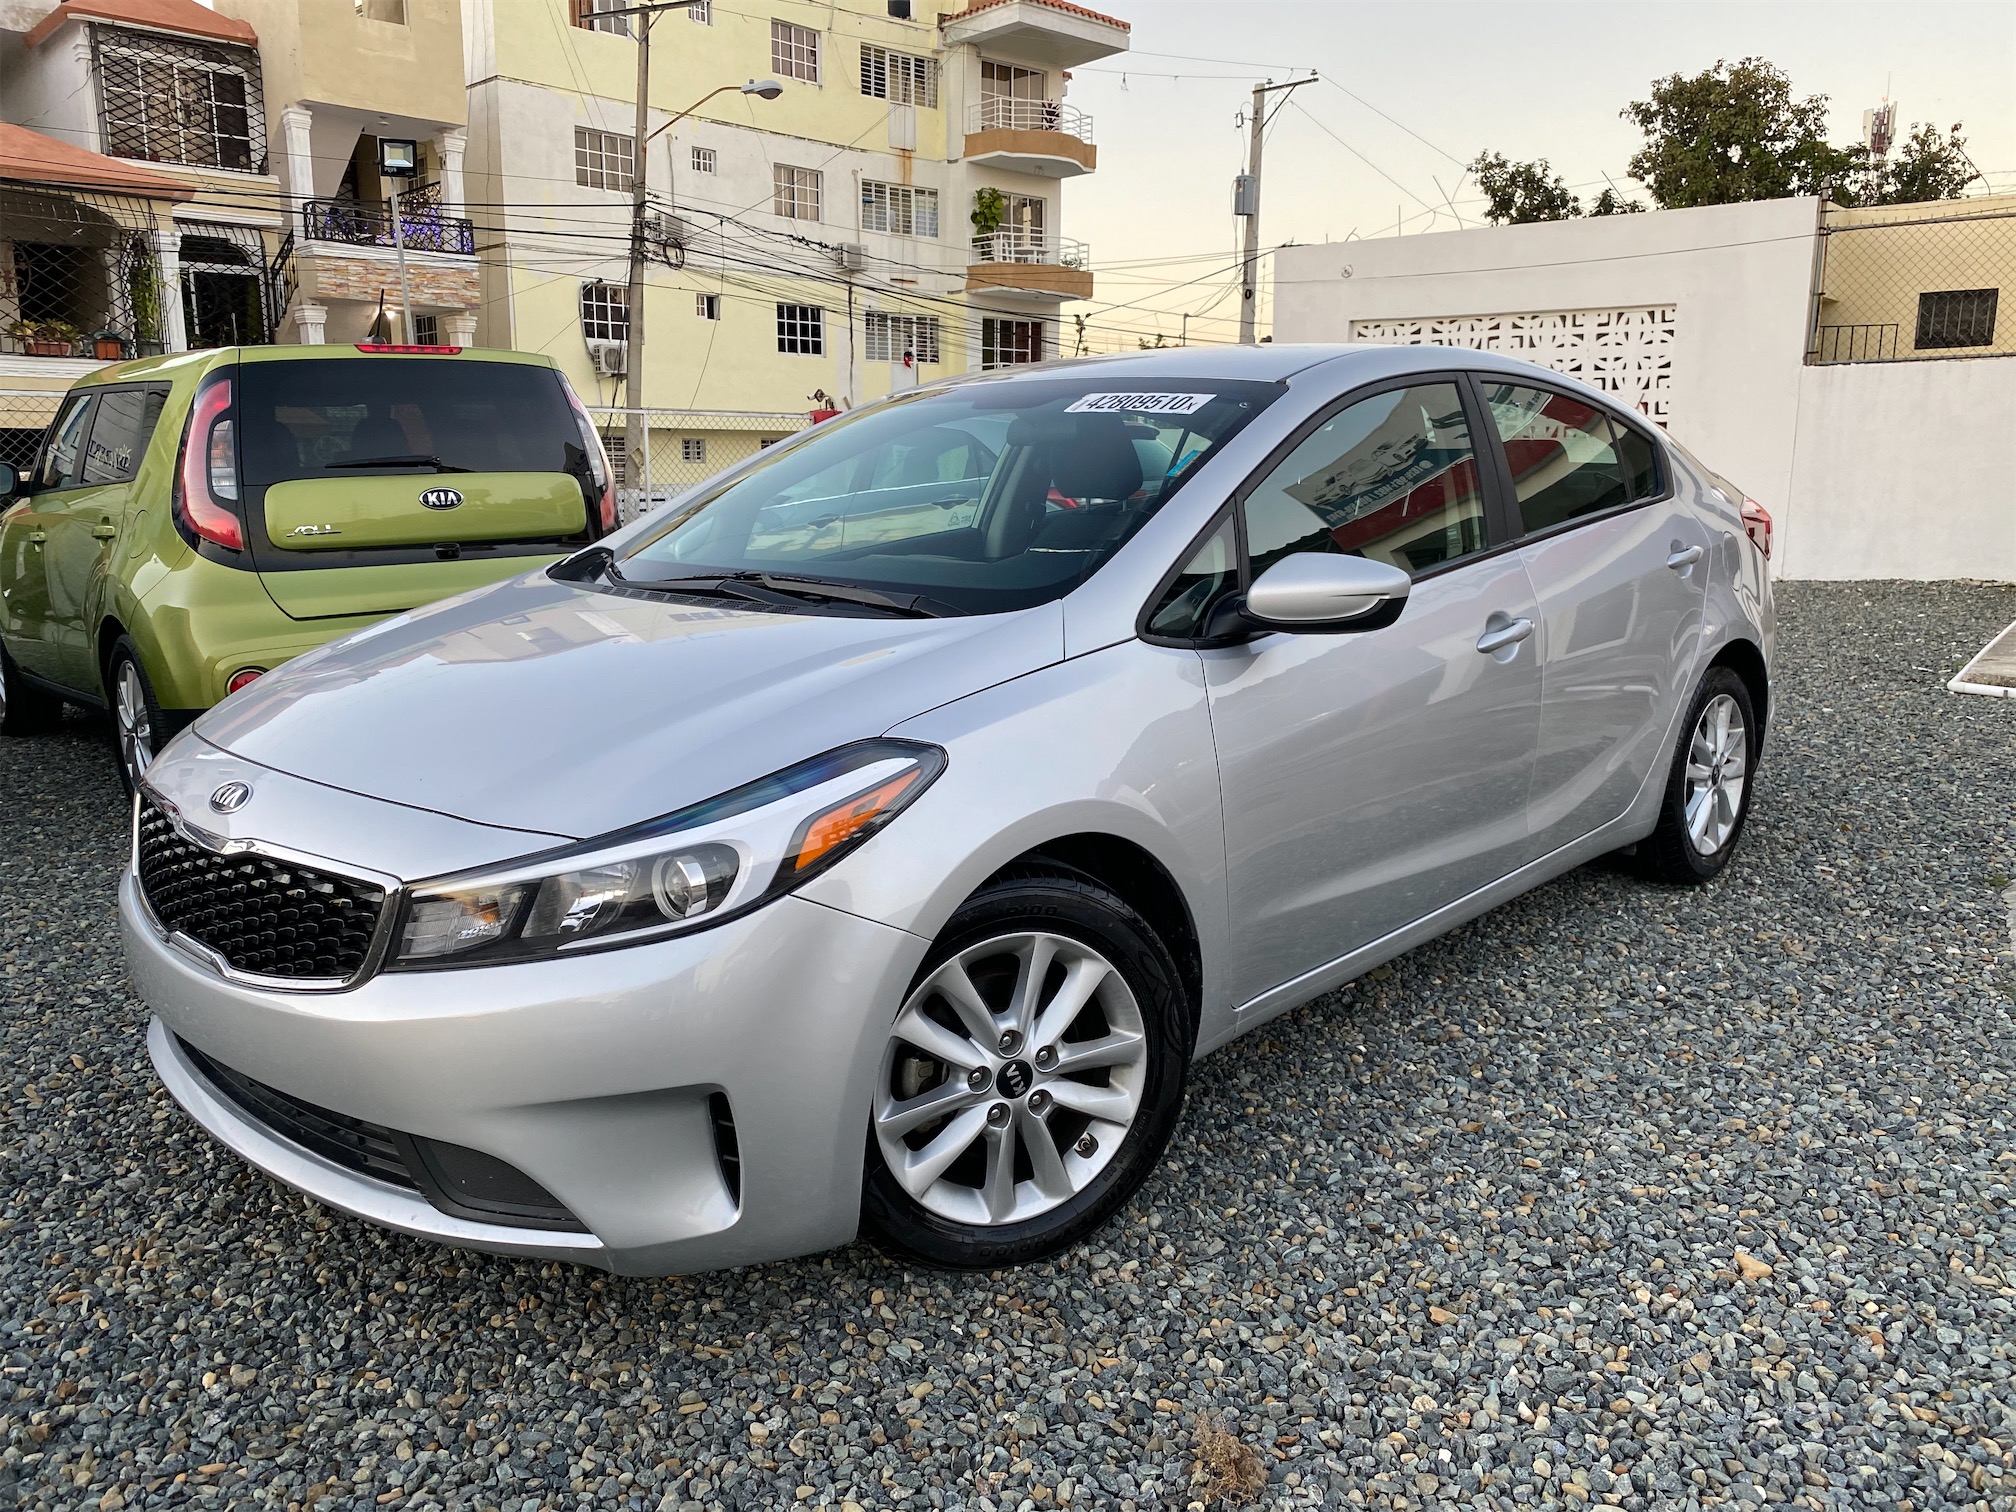 KIA FORTE 2017 LX, CLEAN CARFAX IMPECABLE